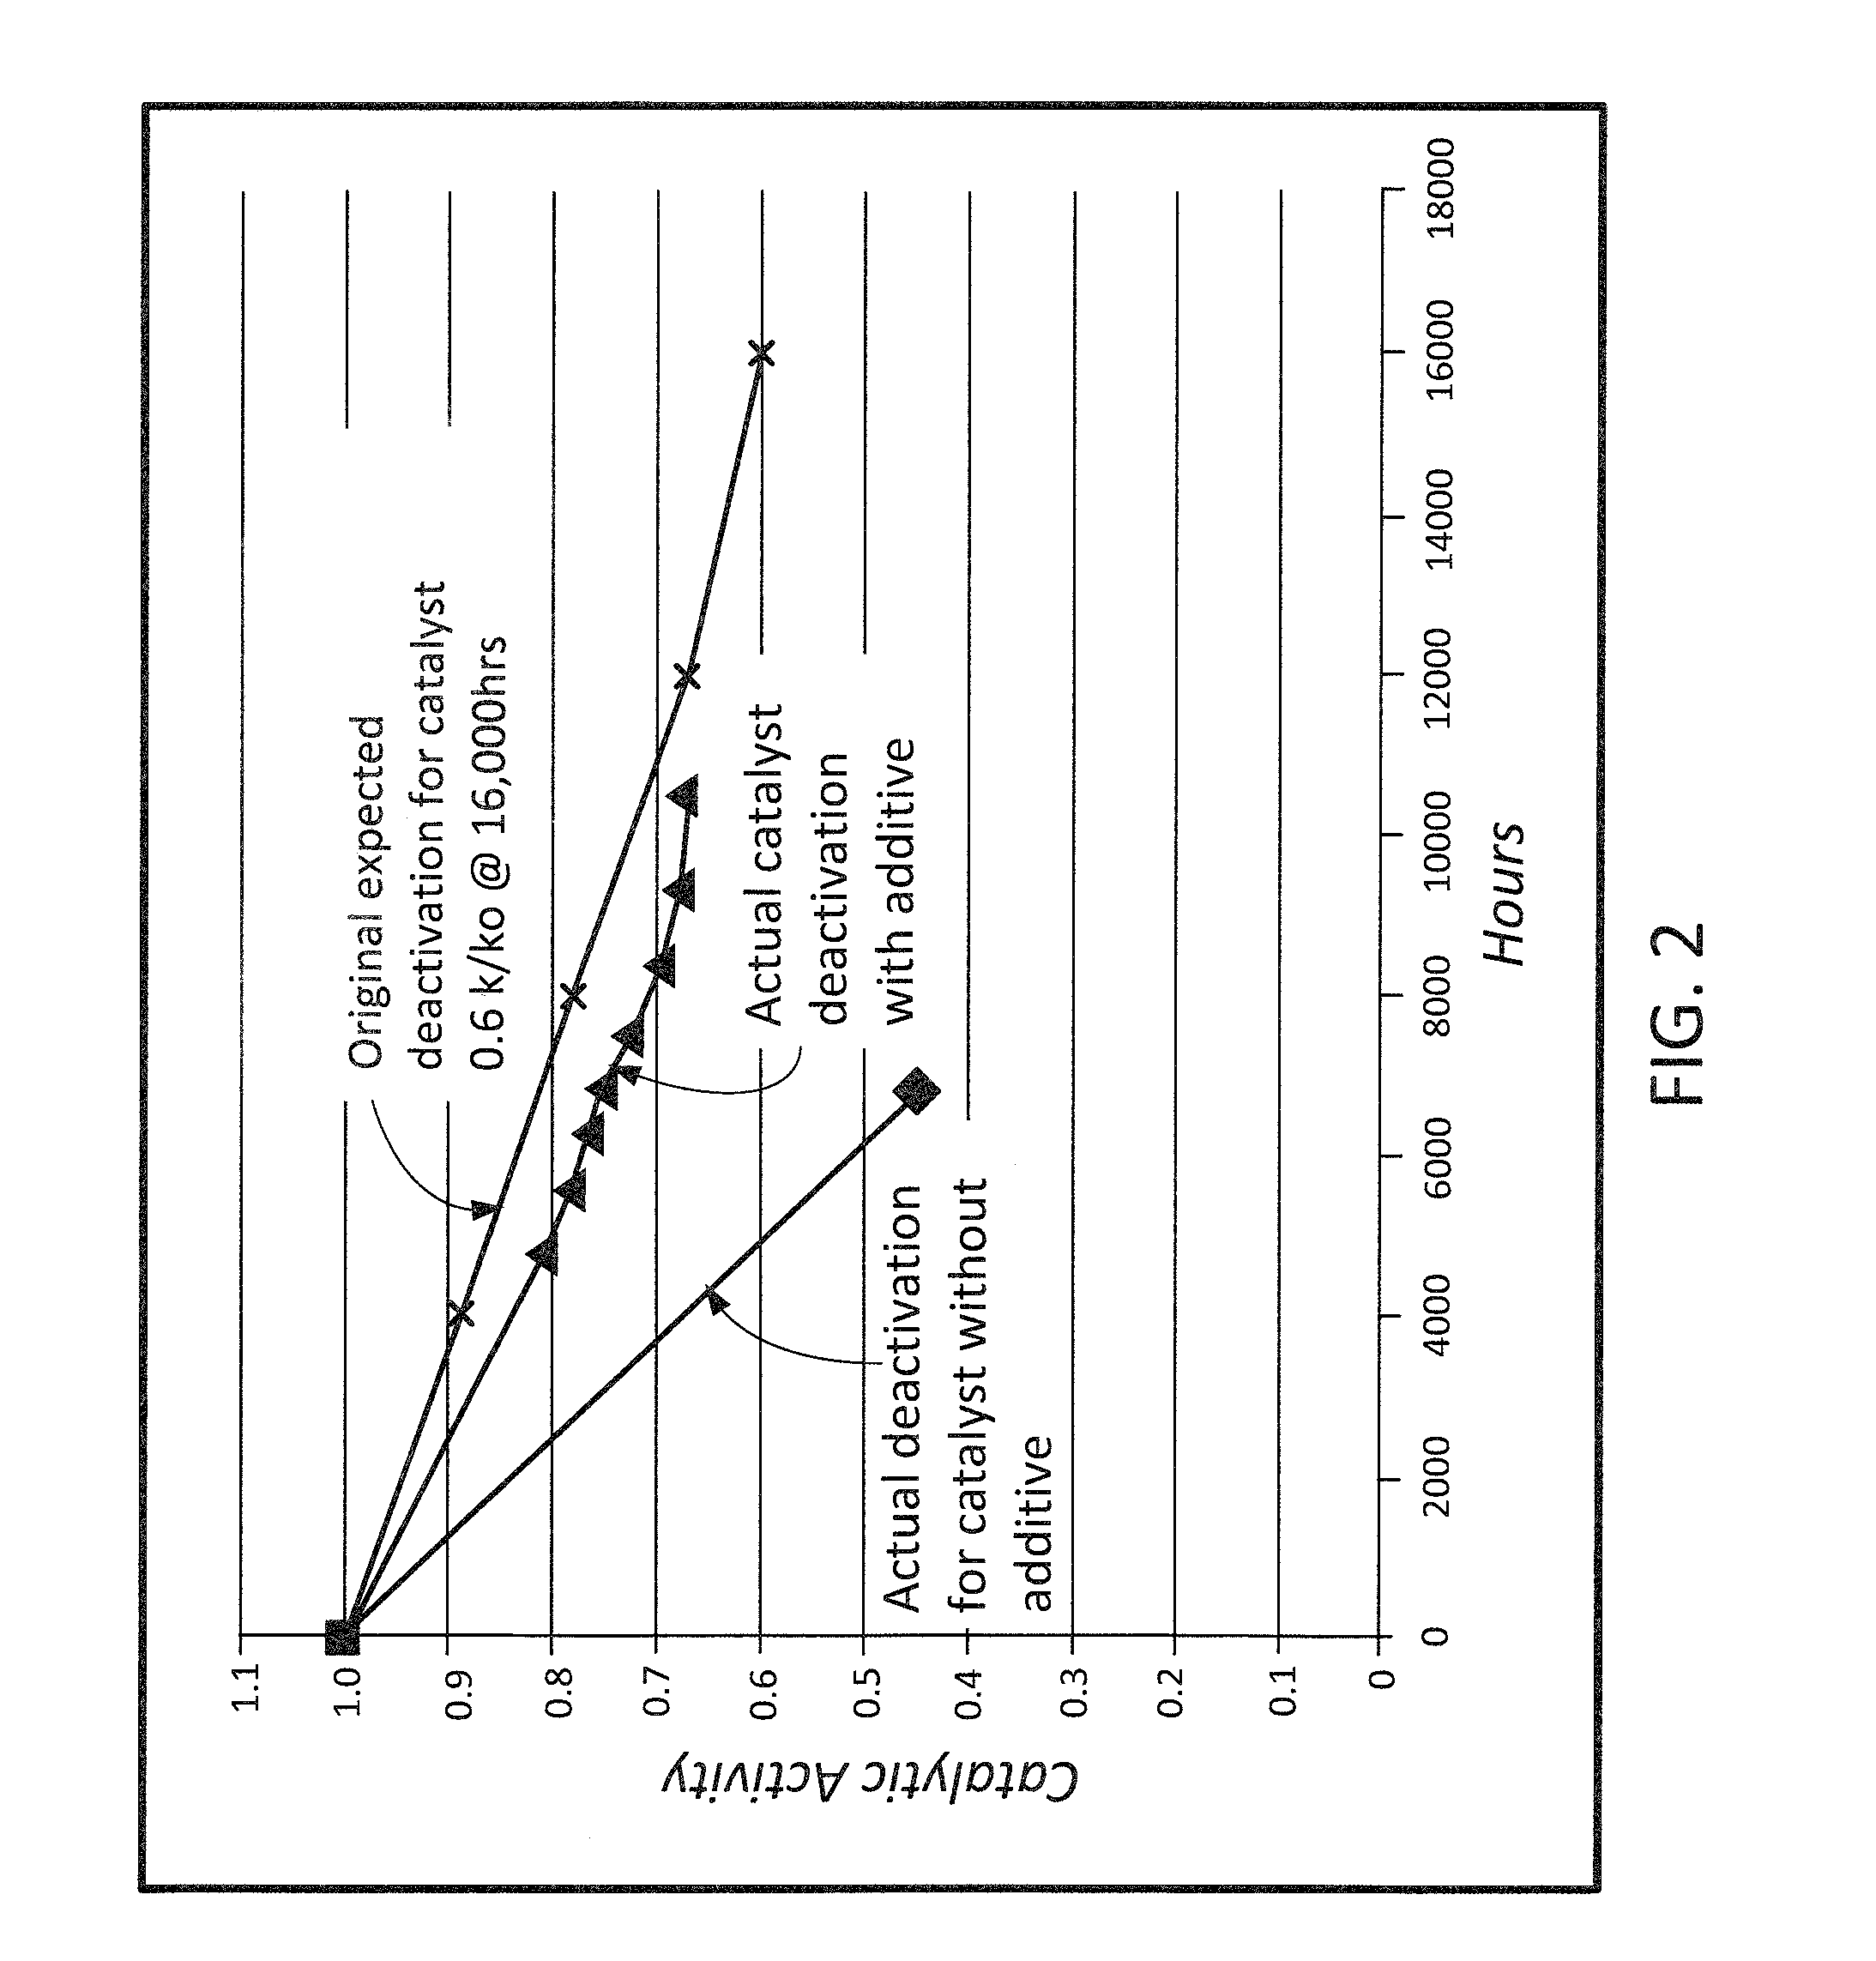 System and method for reducing halogen levels necessary for mercury control, increasing the service life and/or catalytic activity of an scr catalyst and/or control of multiple emissions